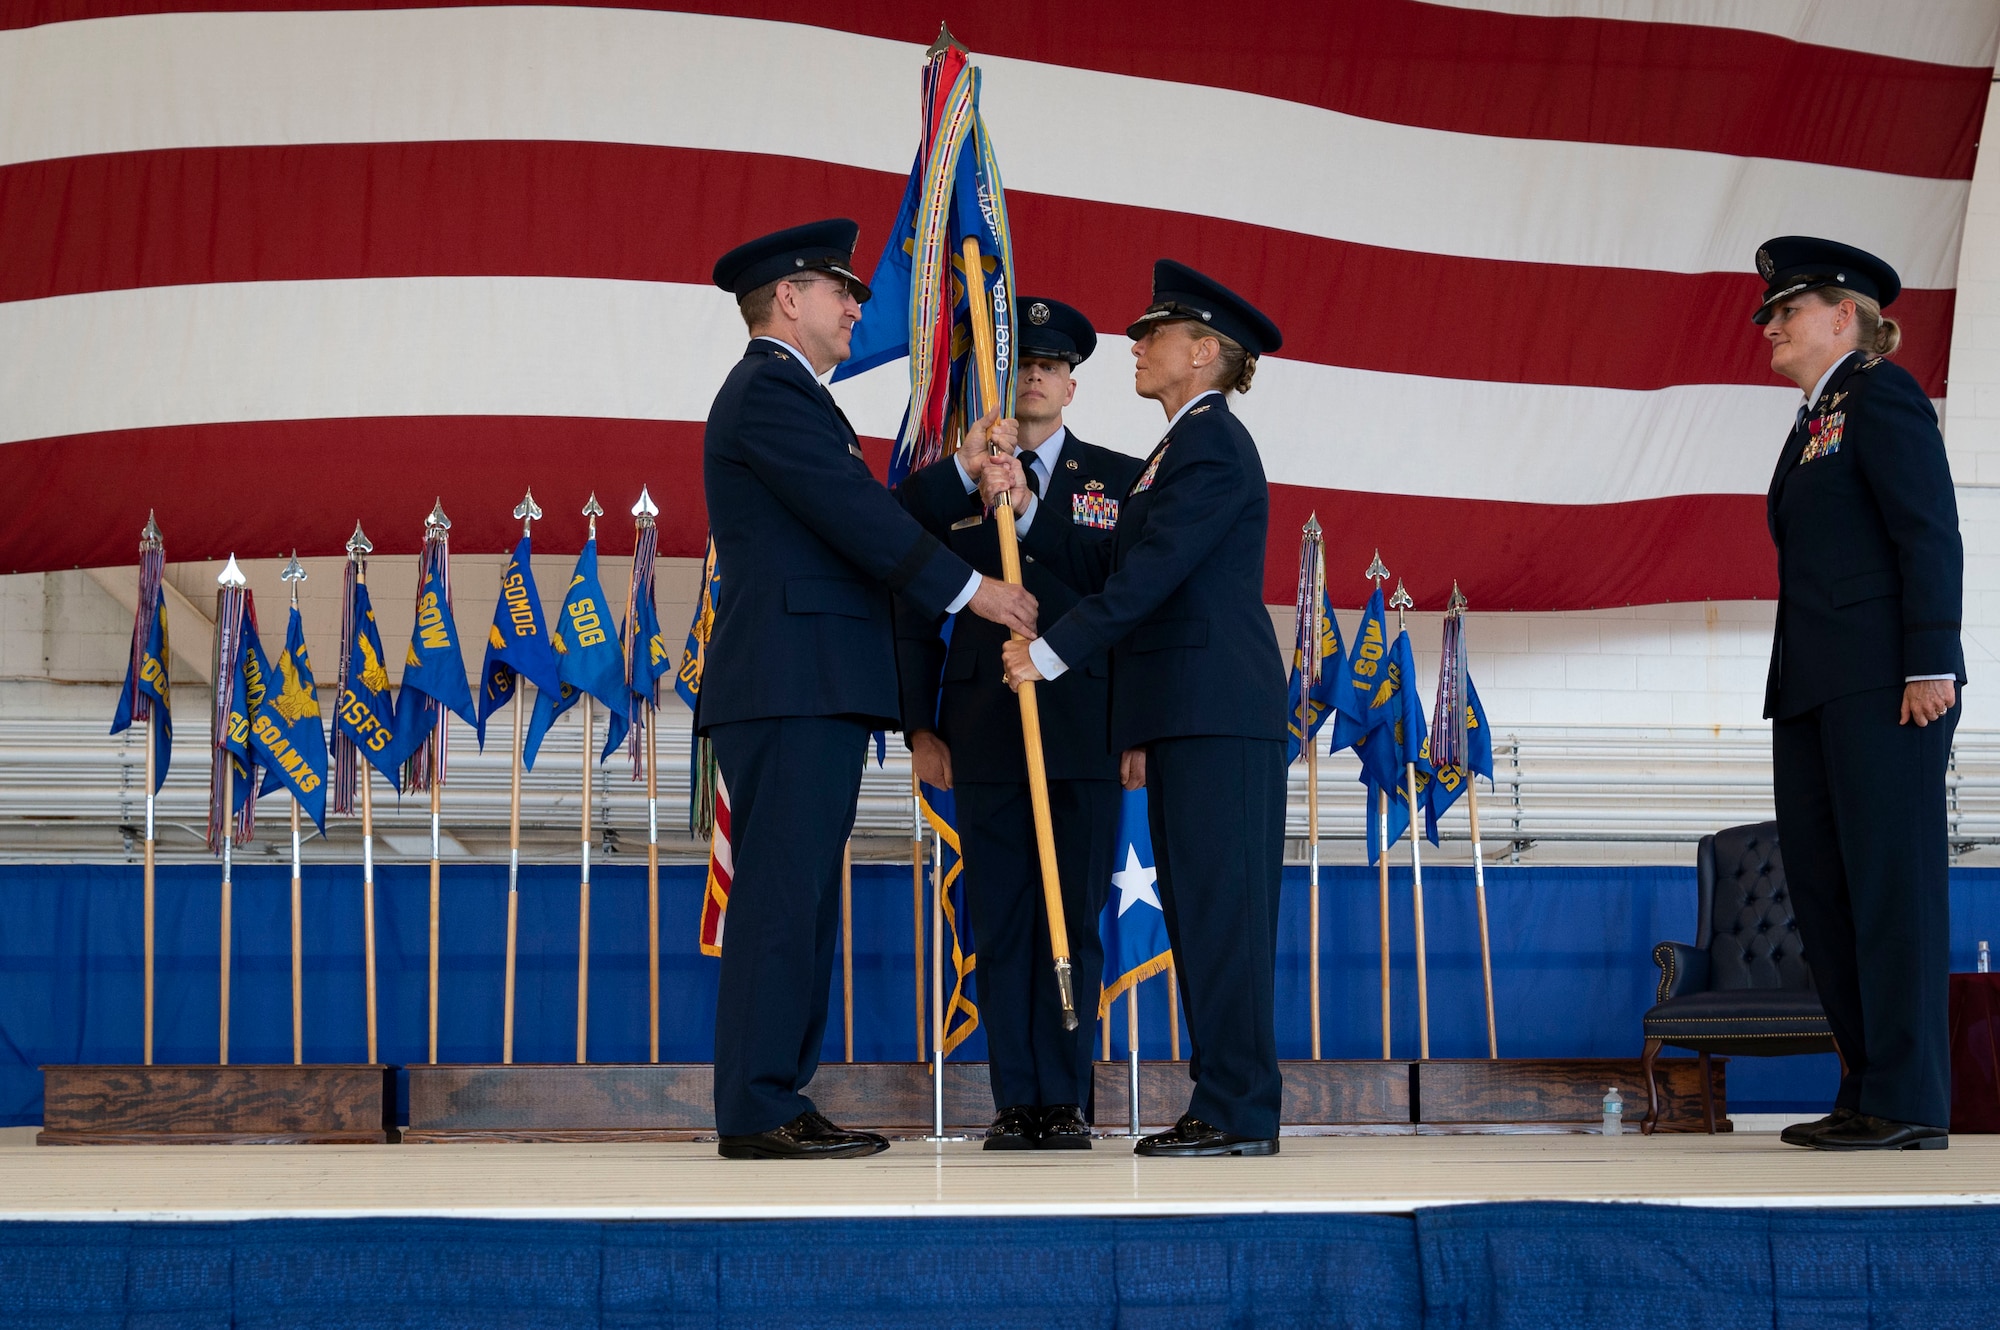 U.S. Air Force Lt. Gen. Jim Slife, commander of Air Force Special Operations Command, passes the 1st Special Operations Wing guidon to U.S. Air Force Col. Allison Black during the 1st SOW change of command ceremony at Hurlburt Field, Florida, July 21, 2022